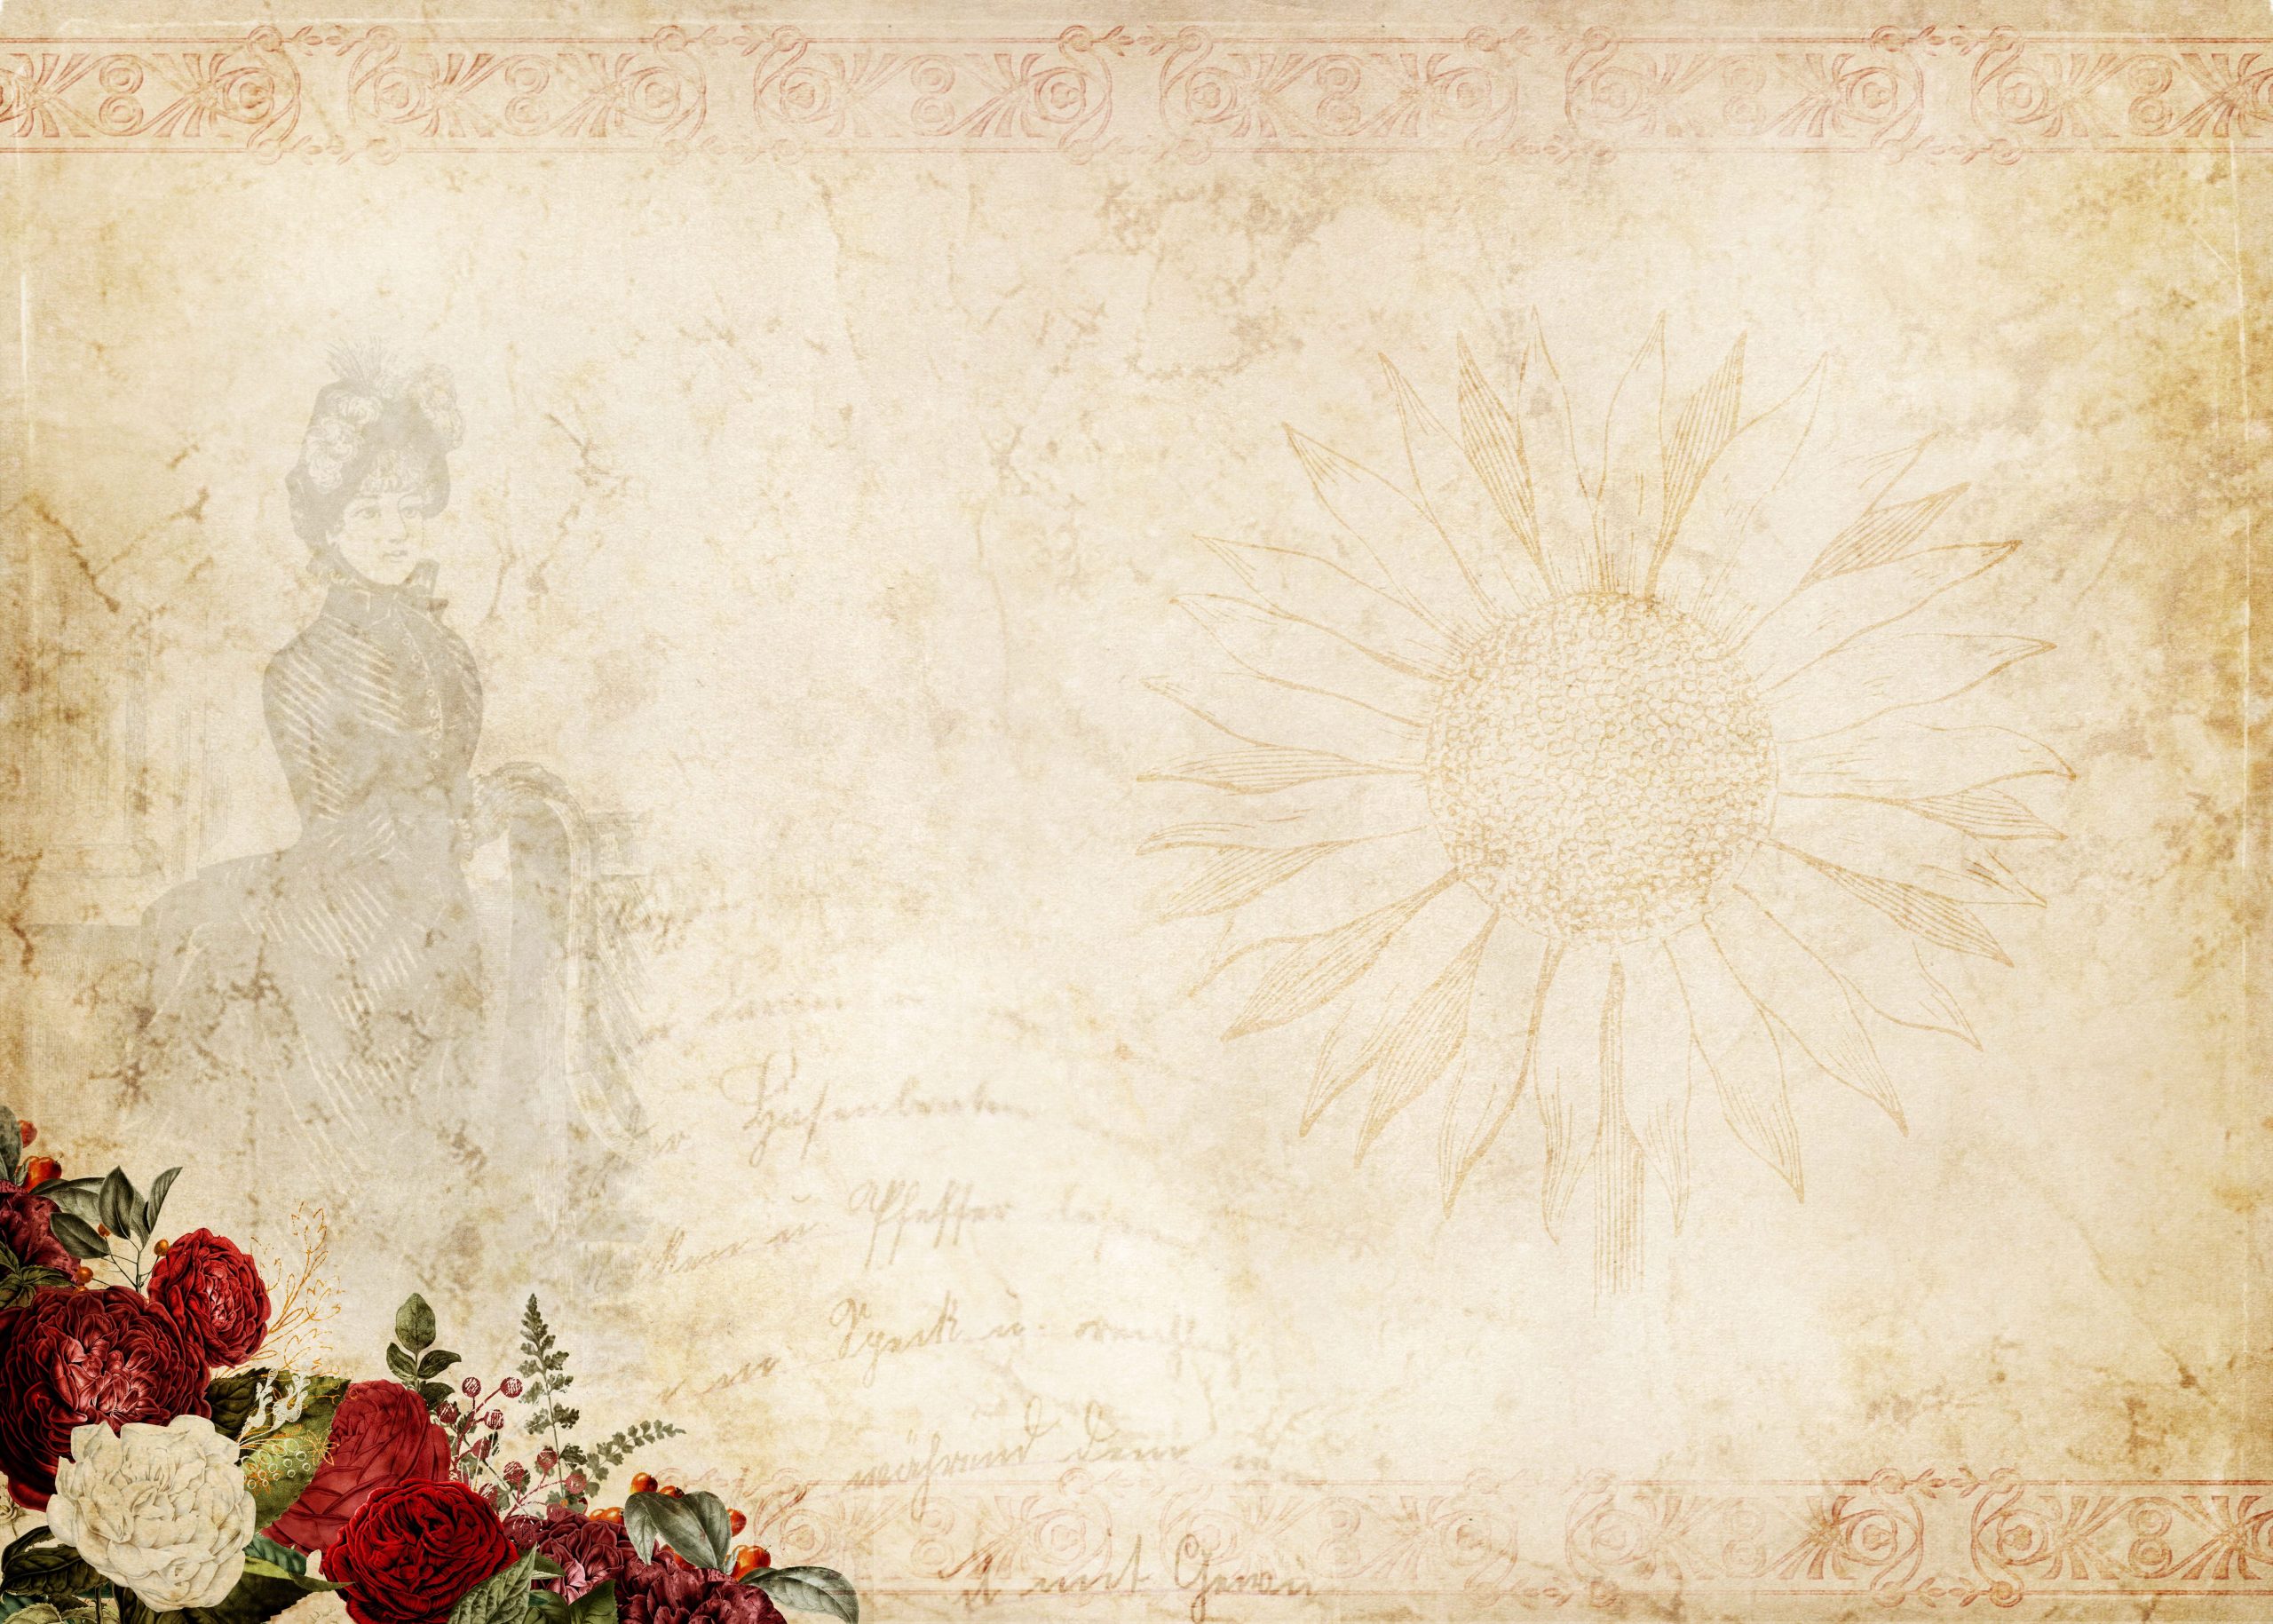 Flowers wallpaper, frame, ornament, shabby, chic, background image, ornaments